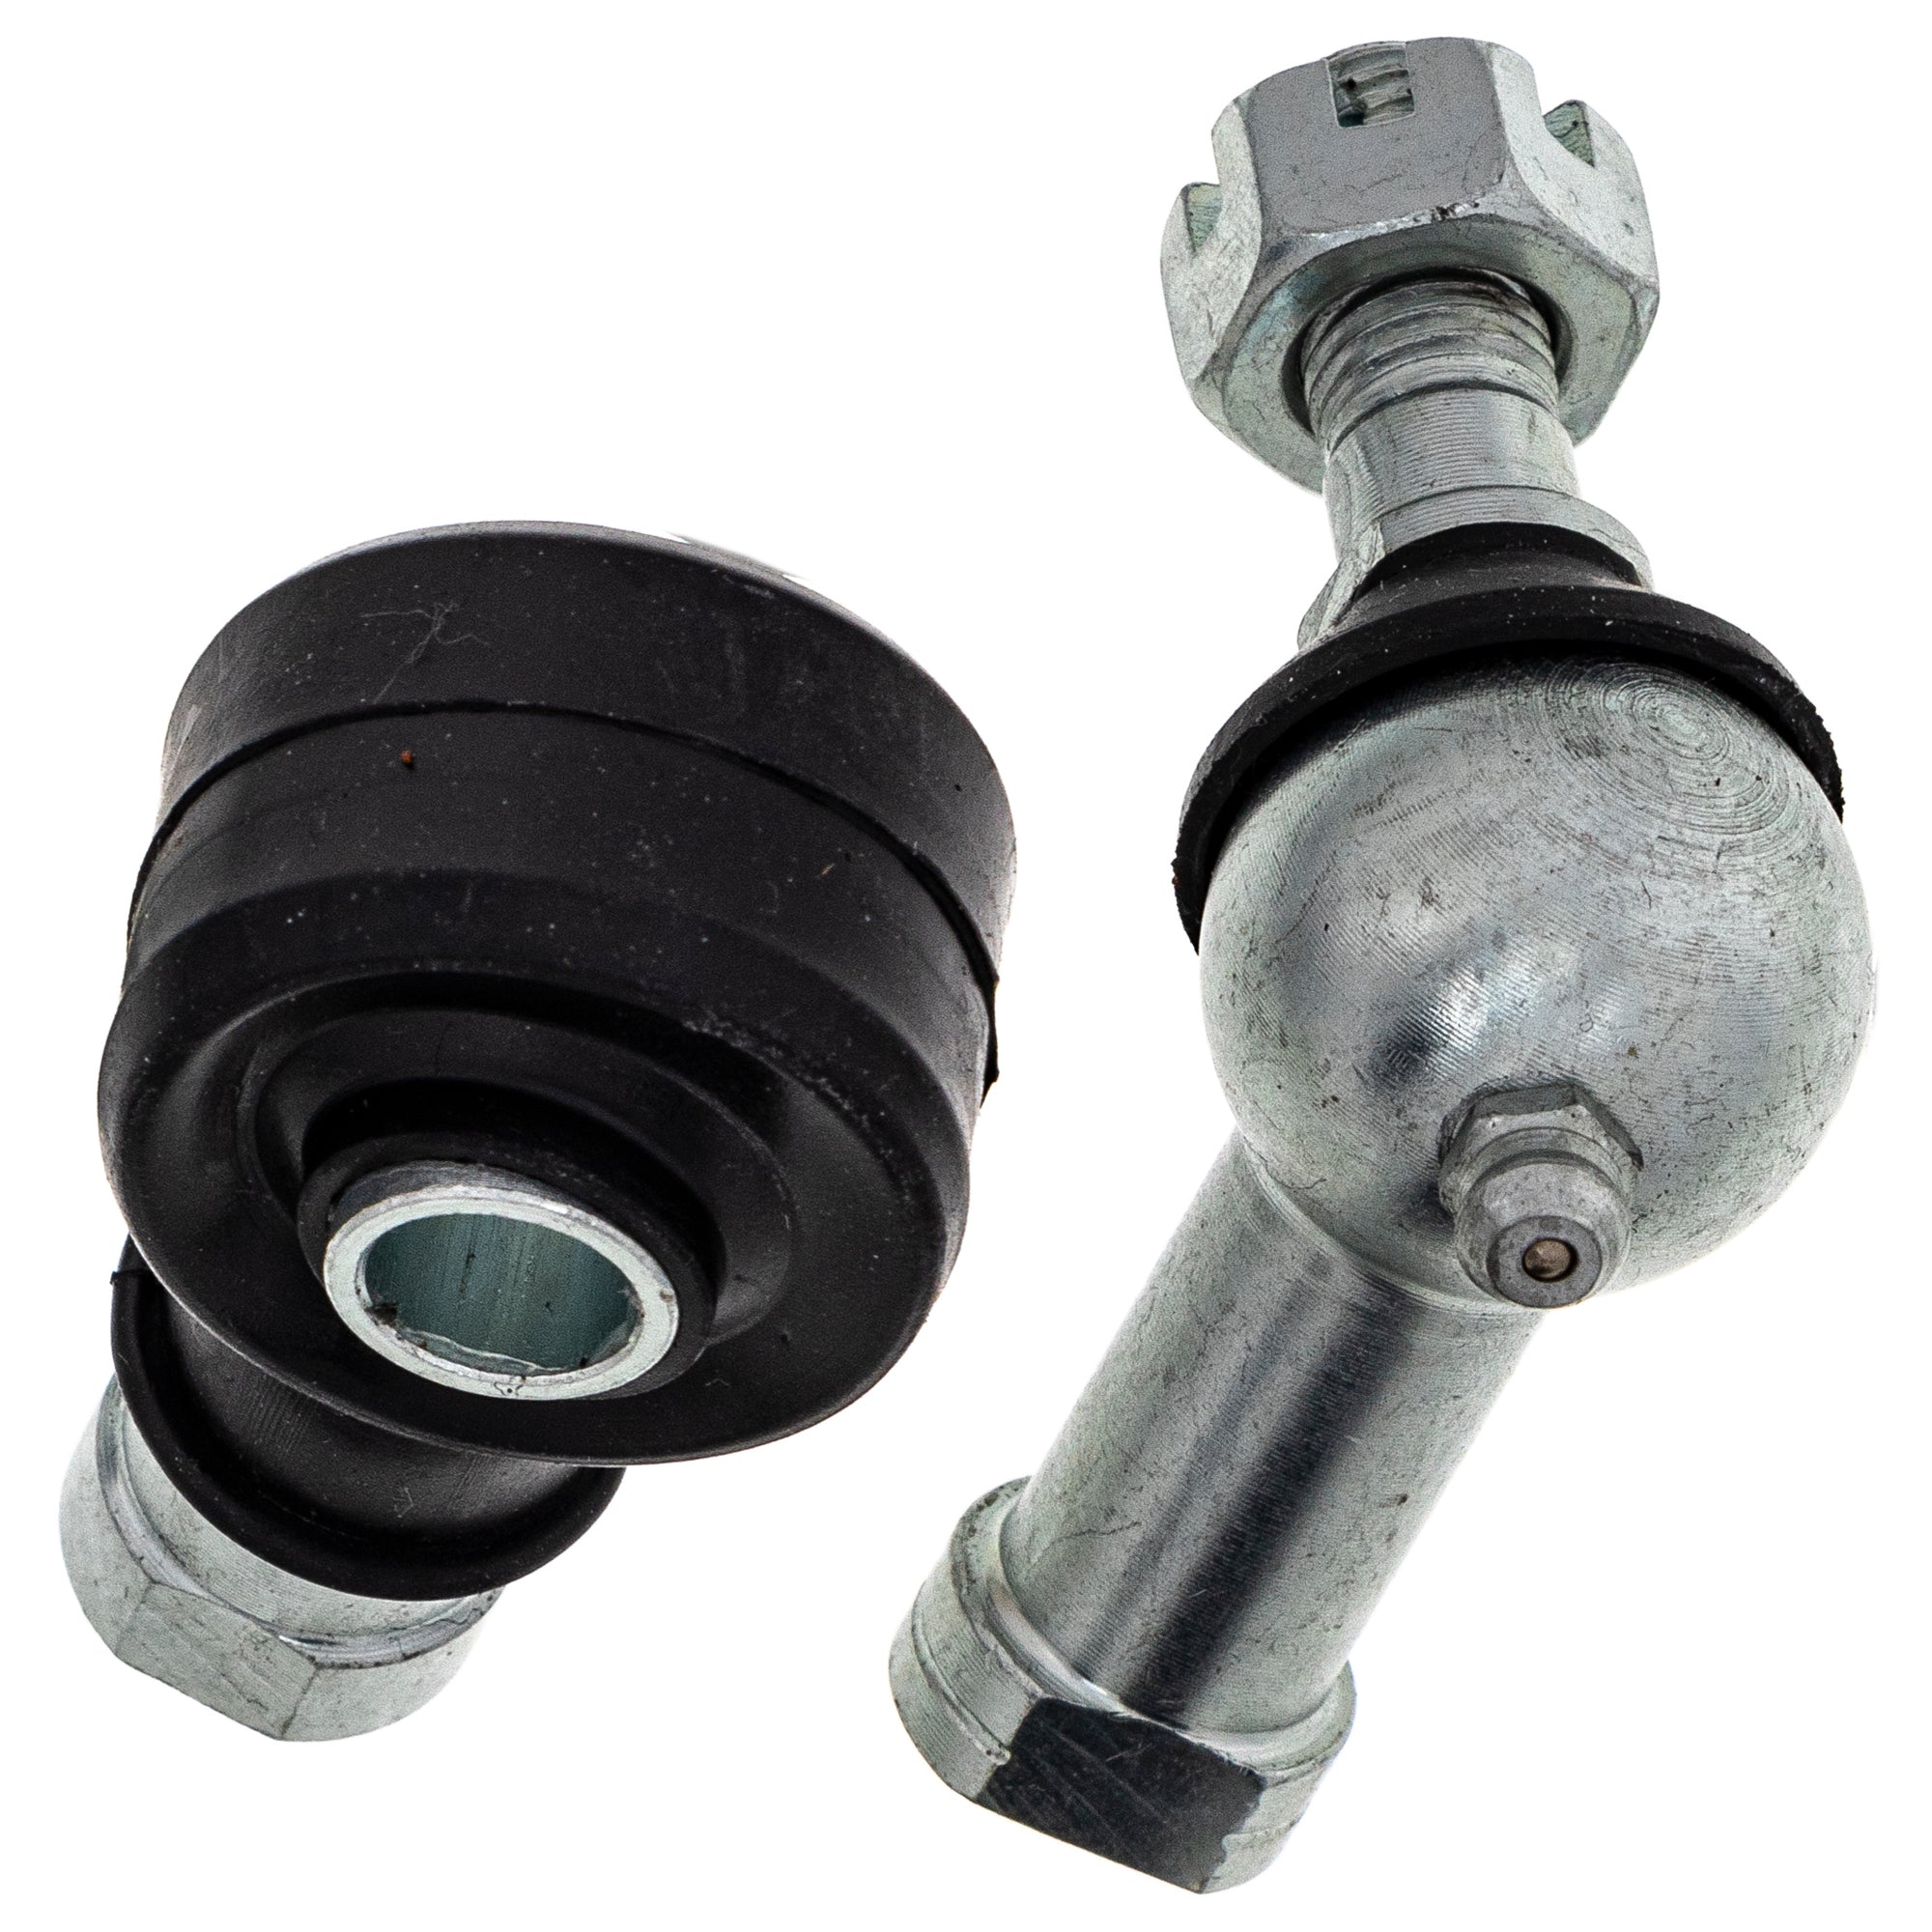 Tie Rod End Ball Joint Kit For Polaris 7061015 7060171